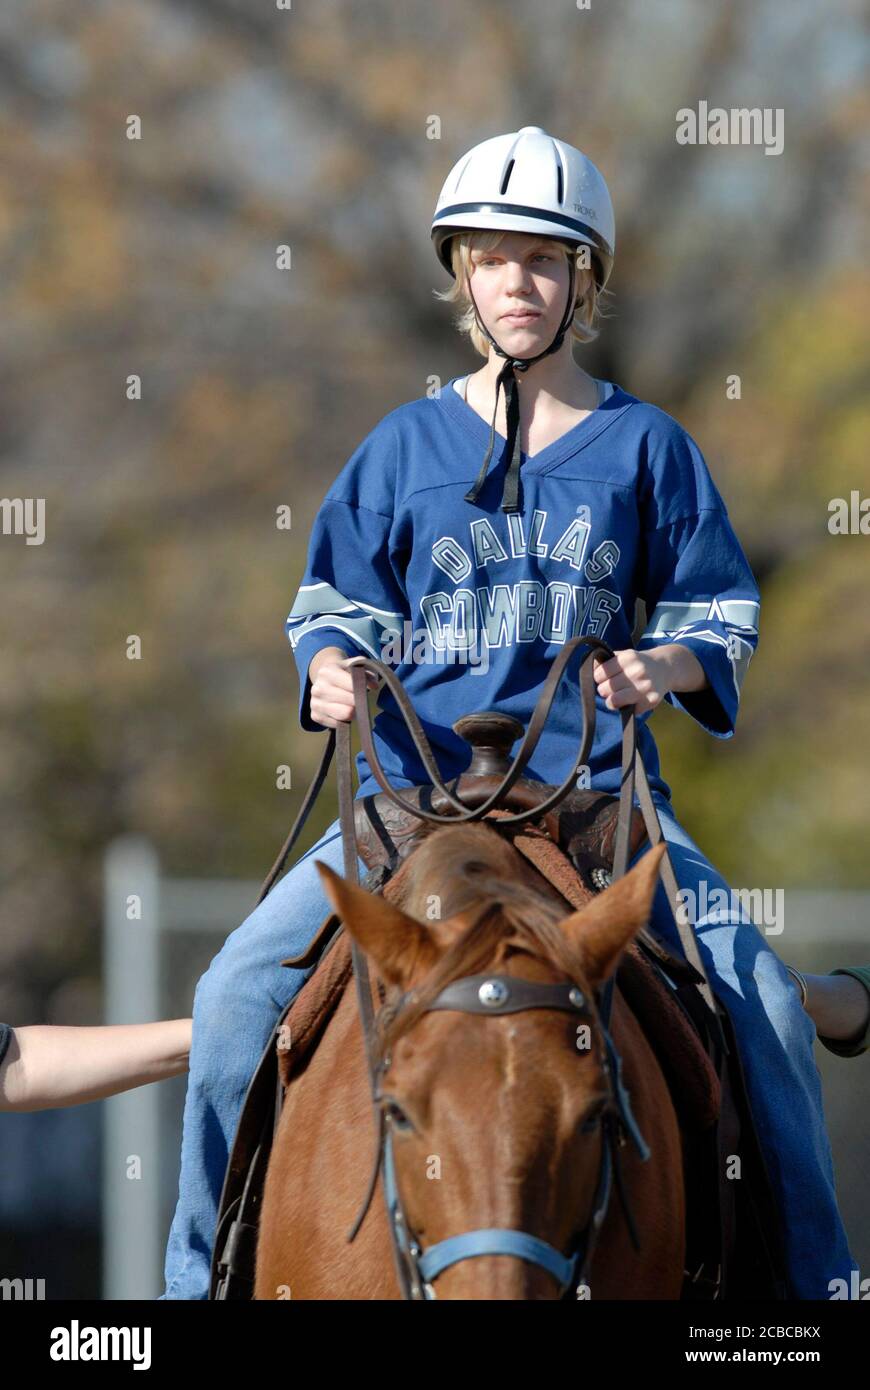 Austin, Texas USA, December 13, 2006: A ninth-grade student who attends Texas School for the Blind and Visually Impaired (TSVBI) experiences horse-riding for the first time during an outing at the school in central Austin.  Area ranchers bring horses to campus once a year to offer new experiences and help build self-confidence for legally blind students.  ©Bob Daemmrich Stock Photo